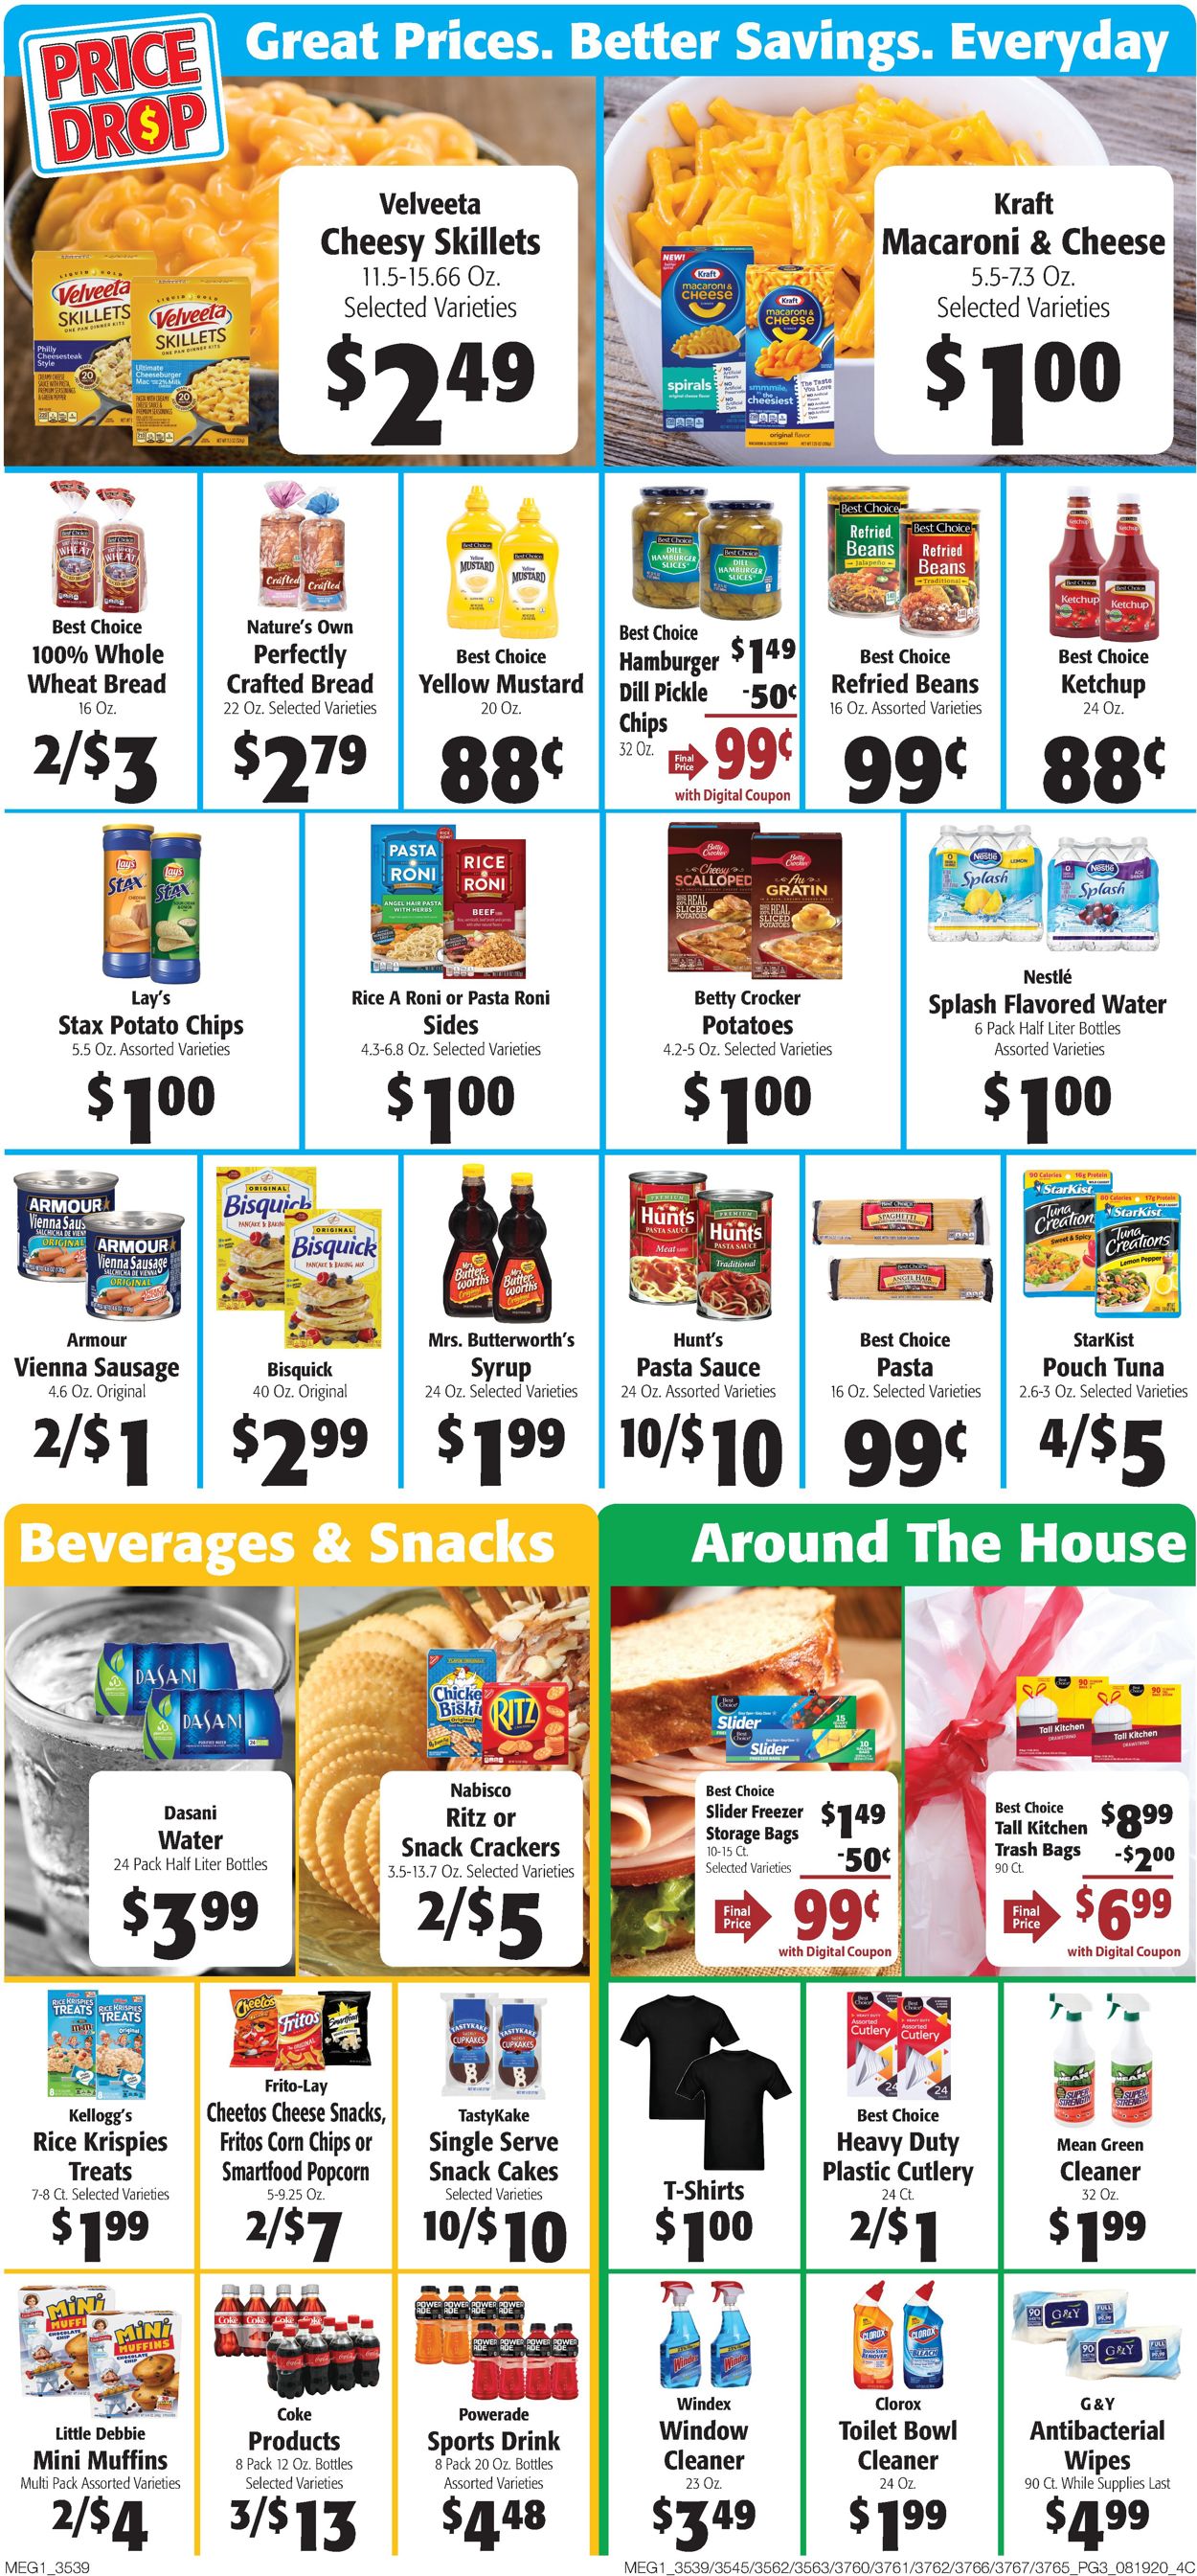 Hays Supermarket Ad from 08/19/2020